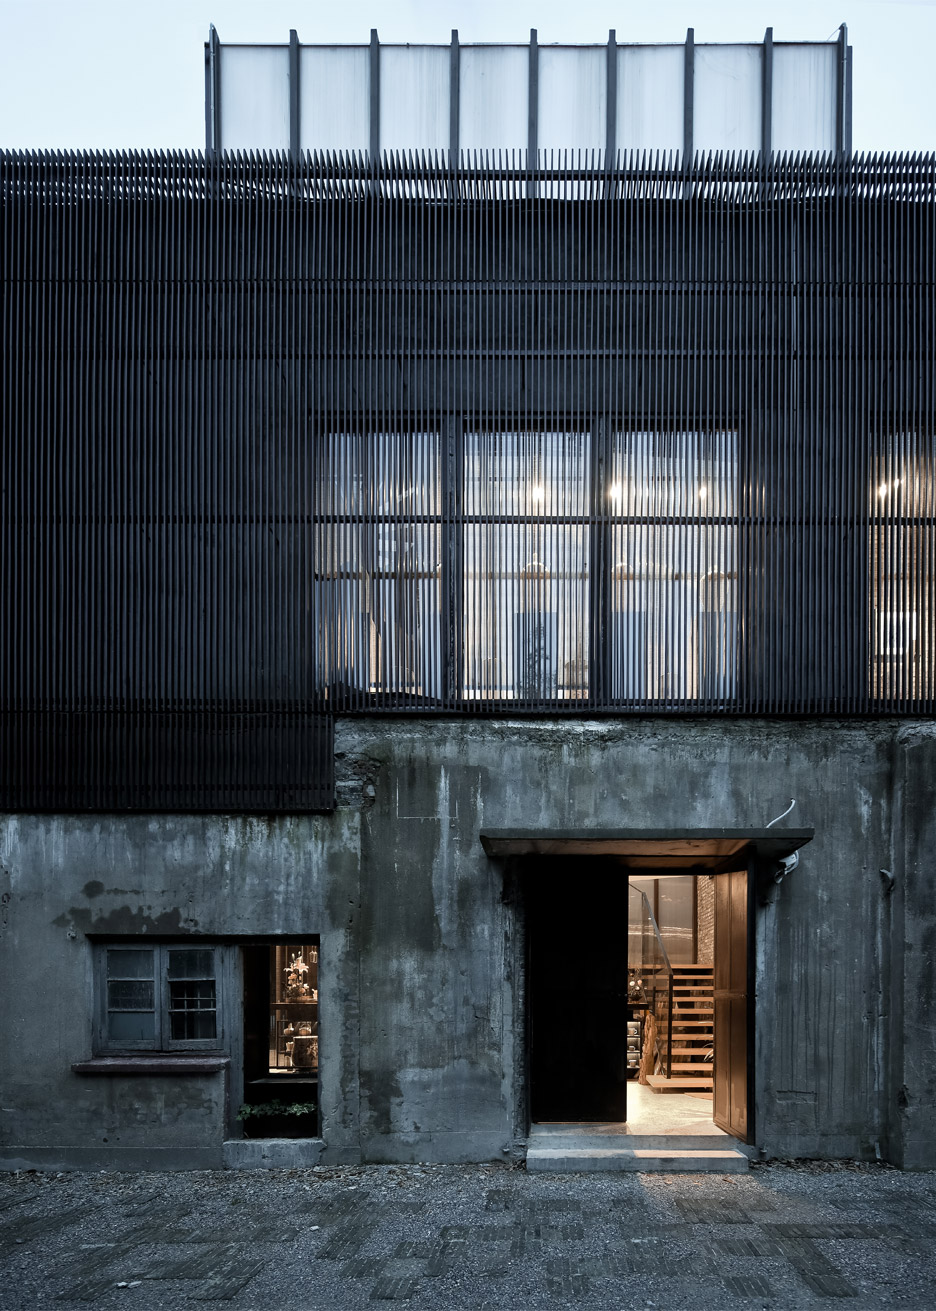 The Ceramic House, a warehouse converted in to an artist studio and home by Archi-Union in Shandhai, China